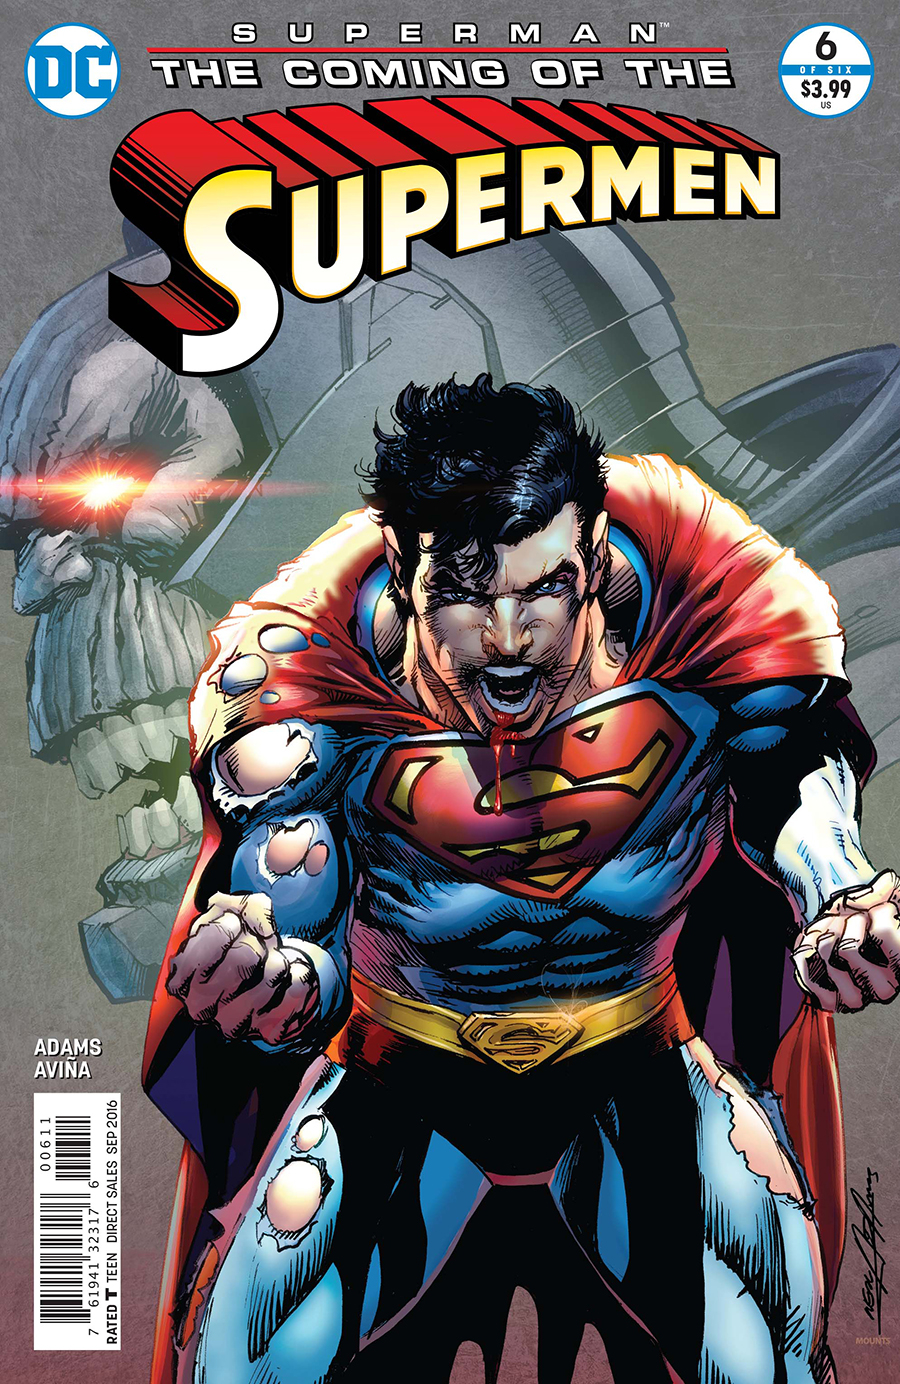 SUPERMAN THE COMING OF THE SUPERMEN #6 (OF 6)